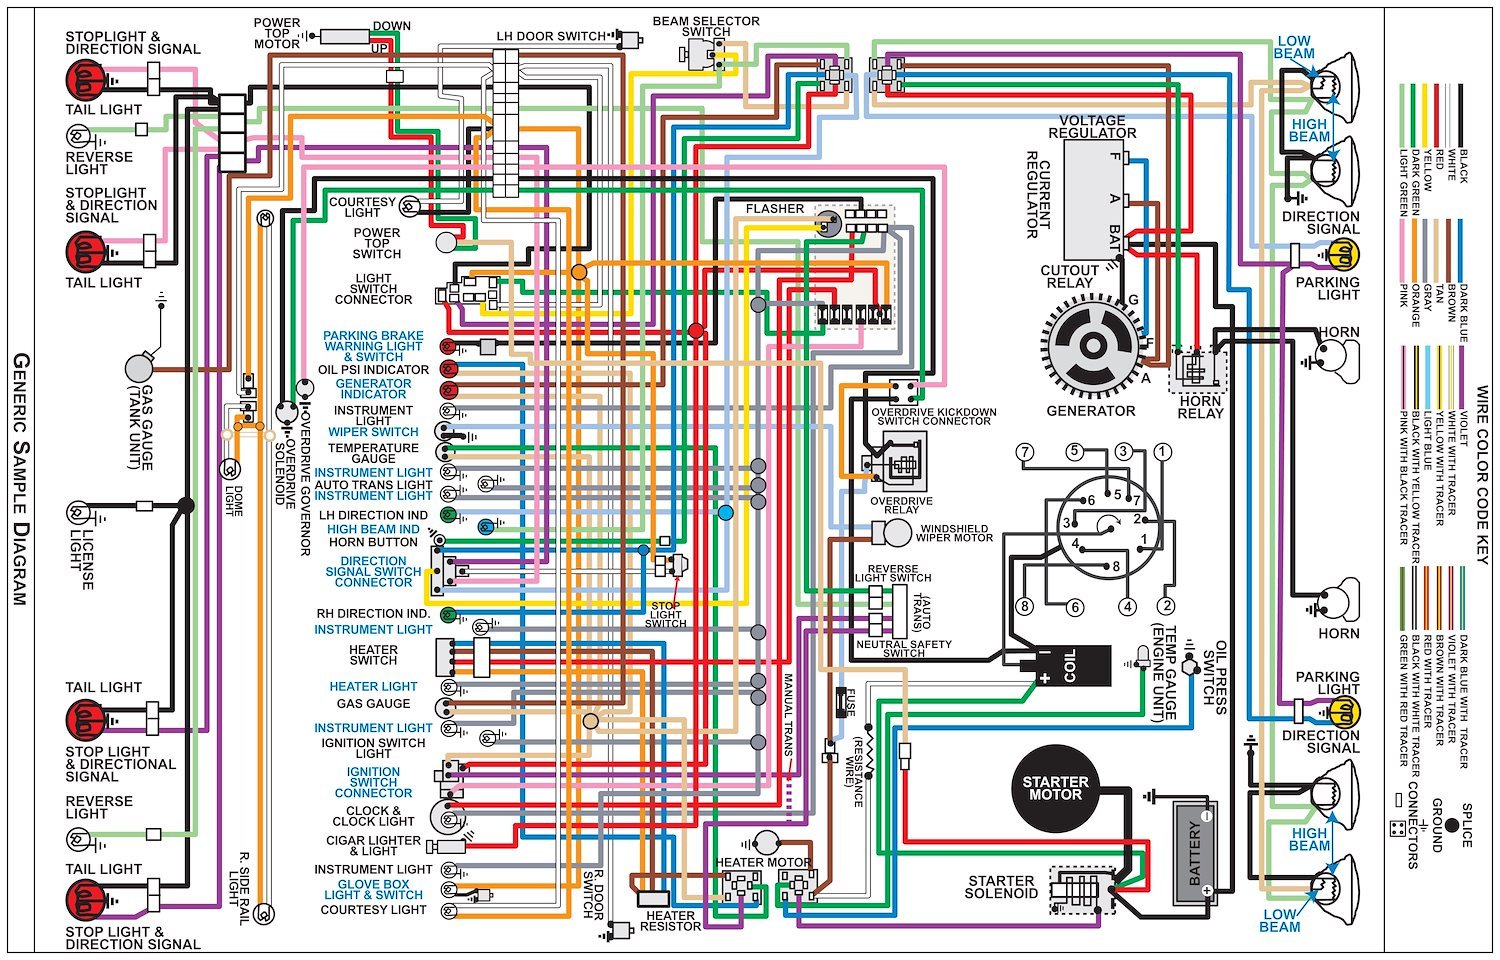 Wiring Diagram for 1979 Chevy Camaro (All Models), 11 in. x 17 in., Laminated